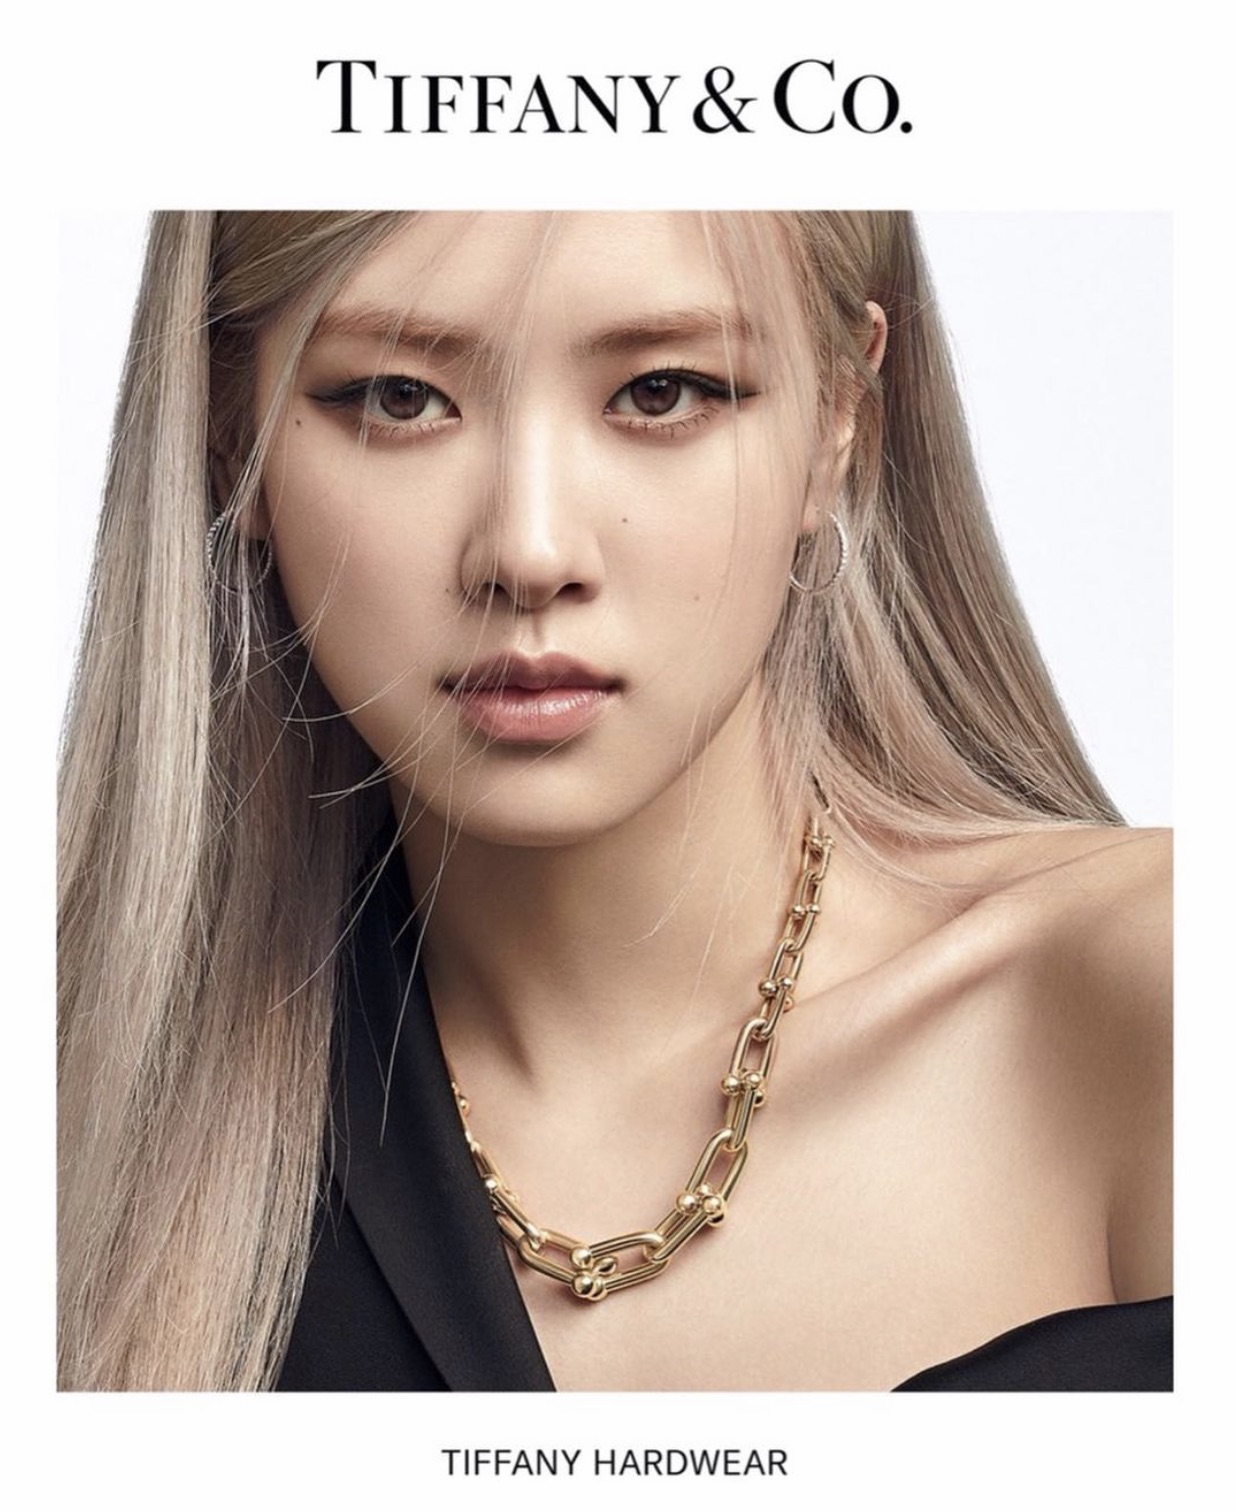 Blackpink's Rosé is the New Face of Tiffany & Co. - 10 Magazine